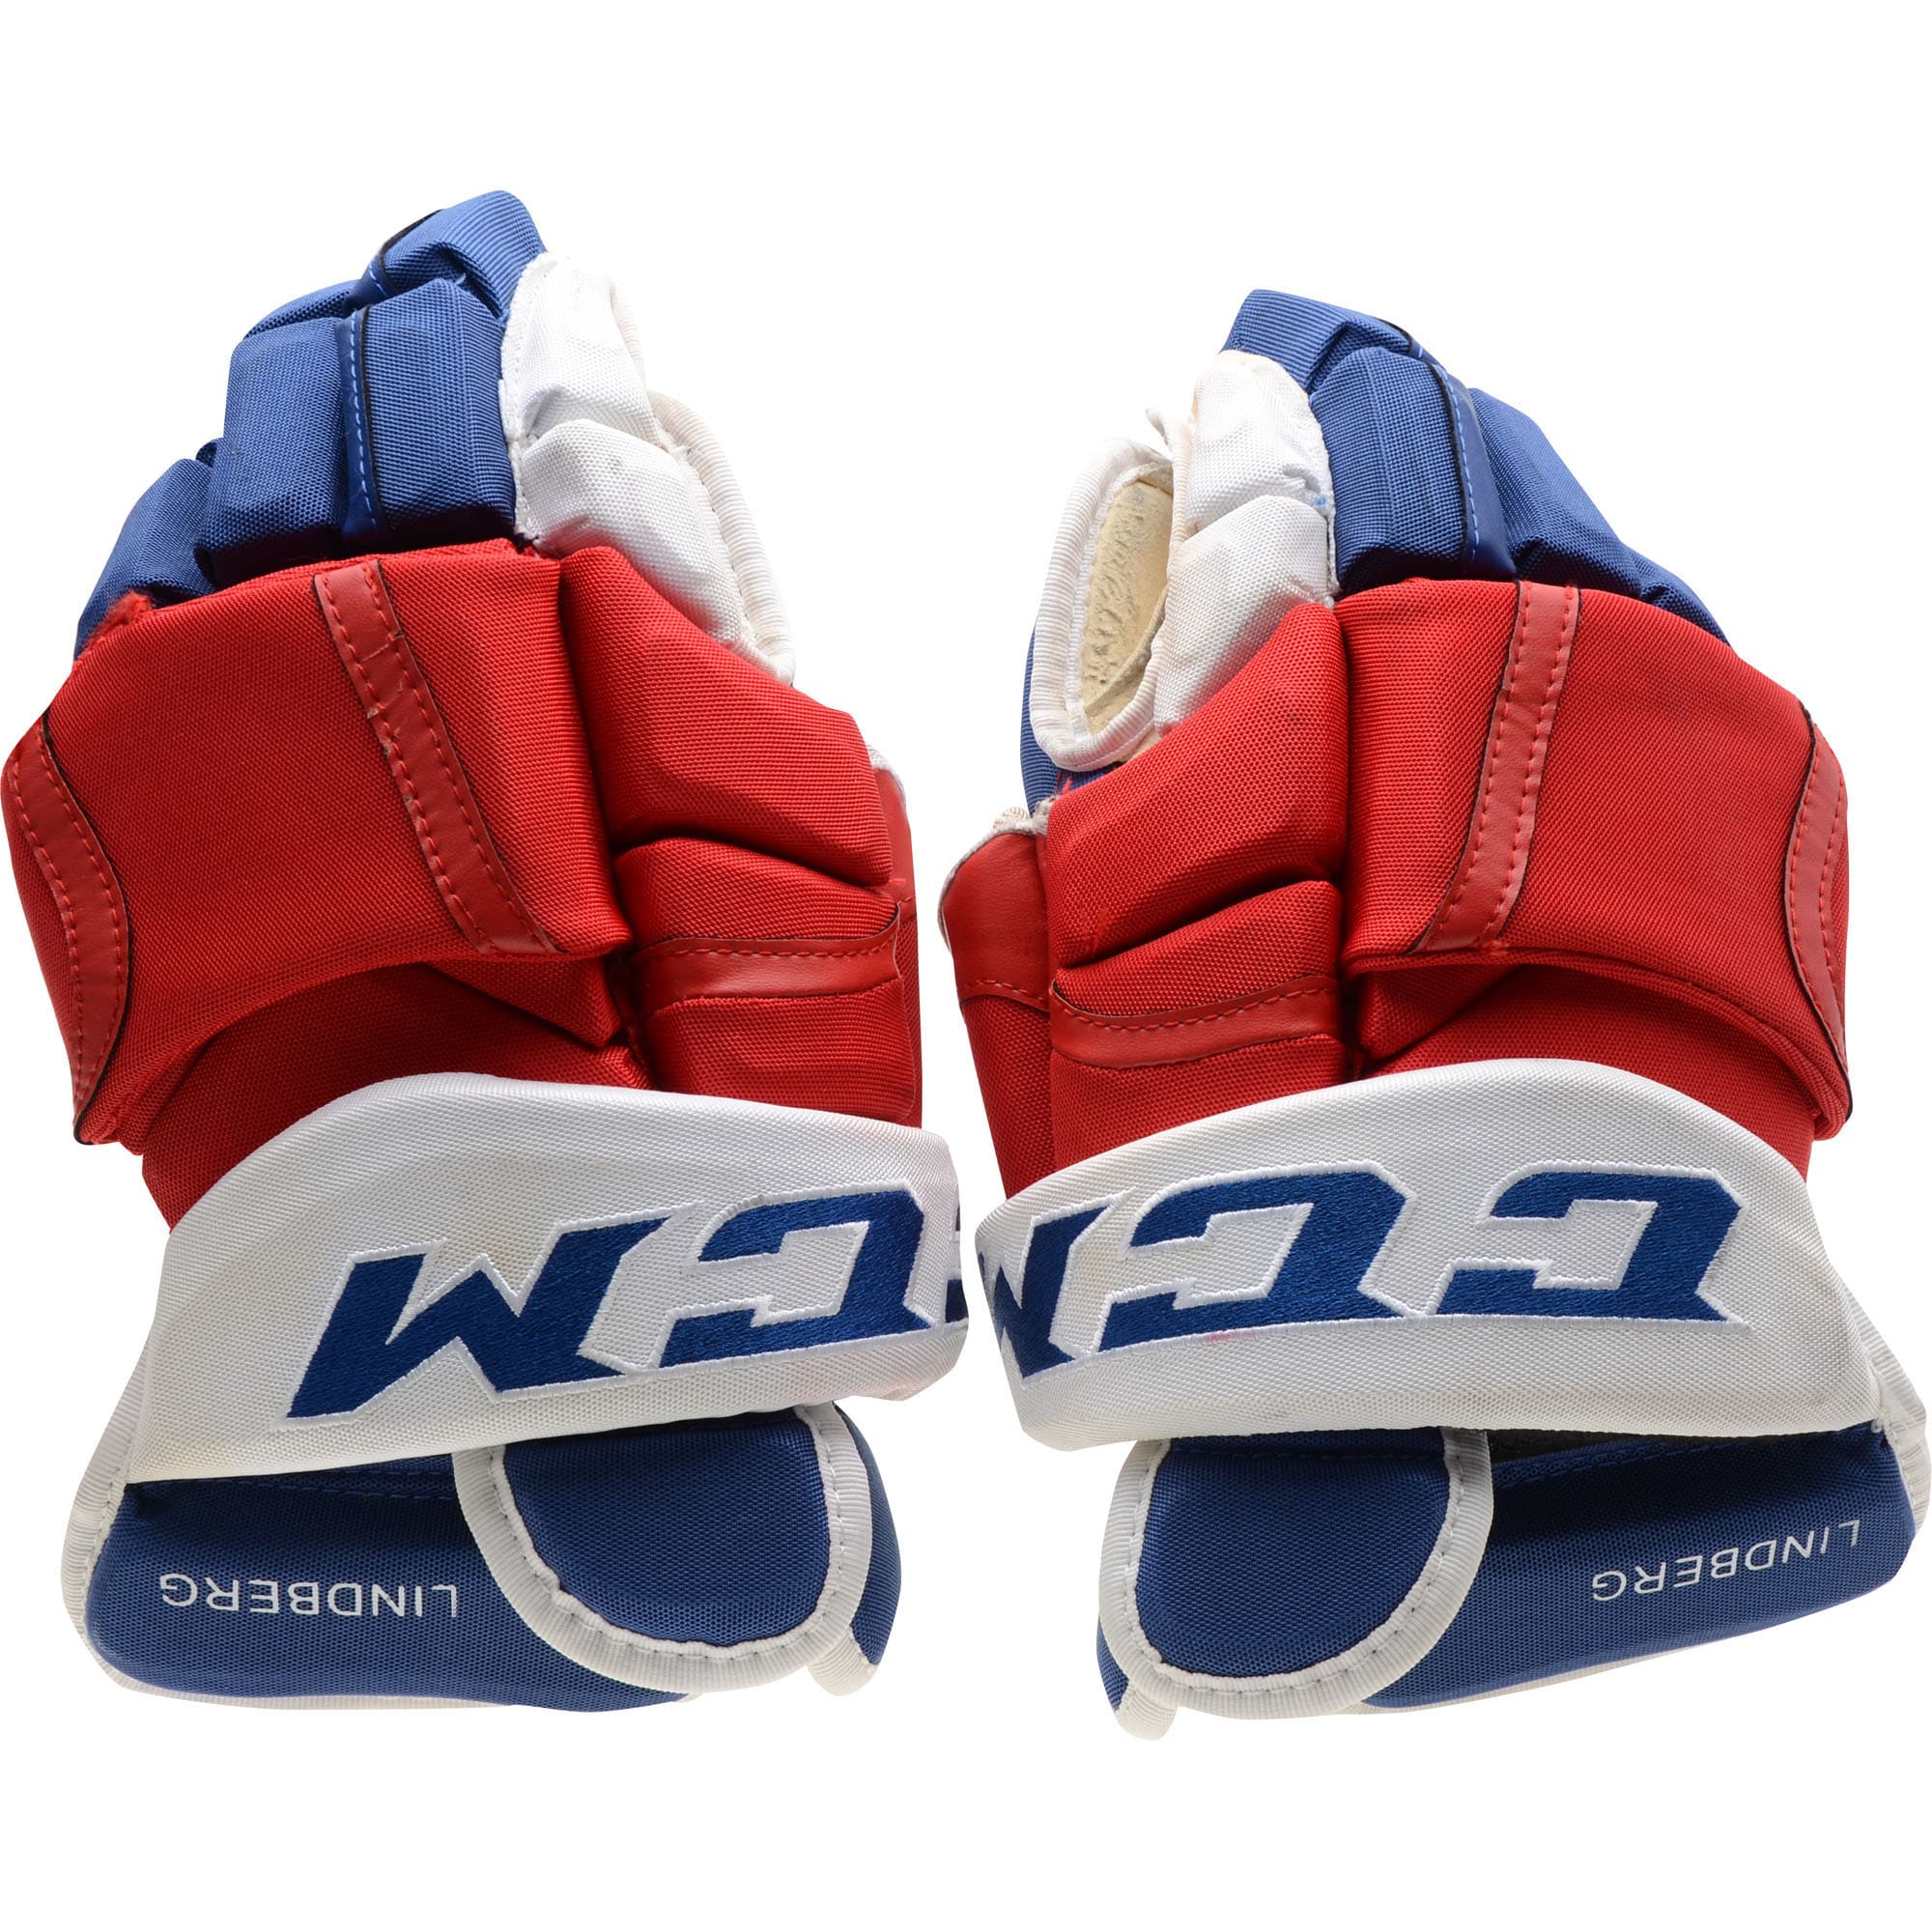 Oscar Lindberg New York Rangers Game-Used Blue and Red CCM Gloves from the 2016-17 NHL Season